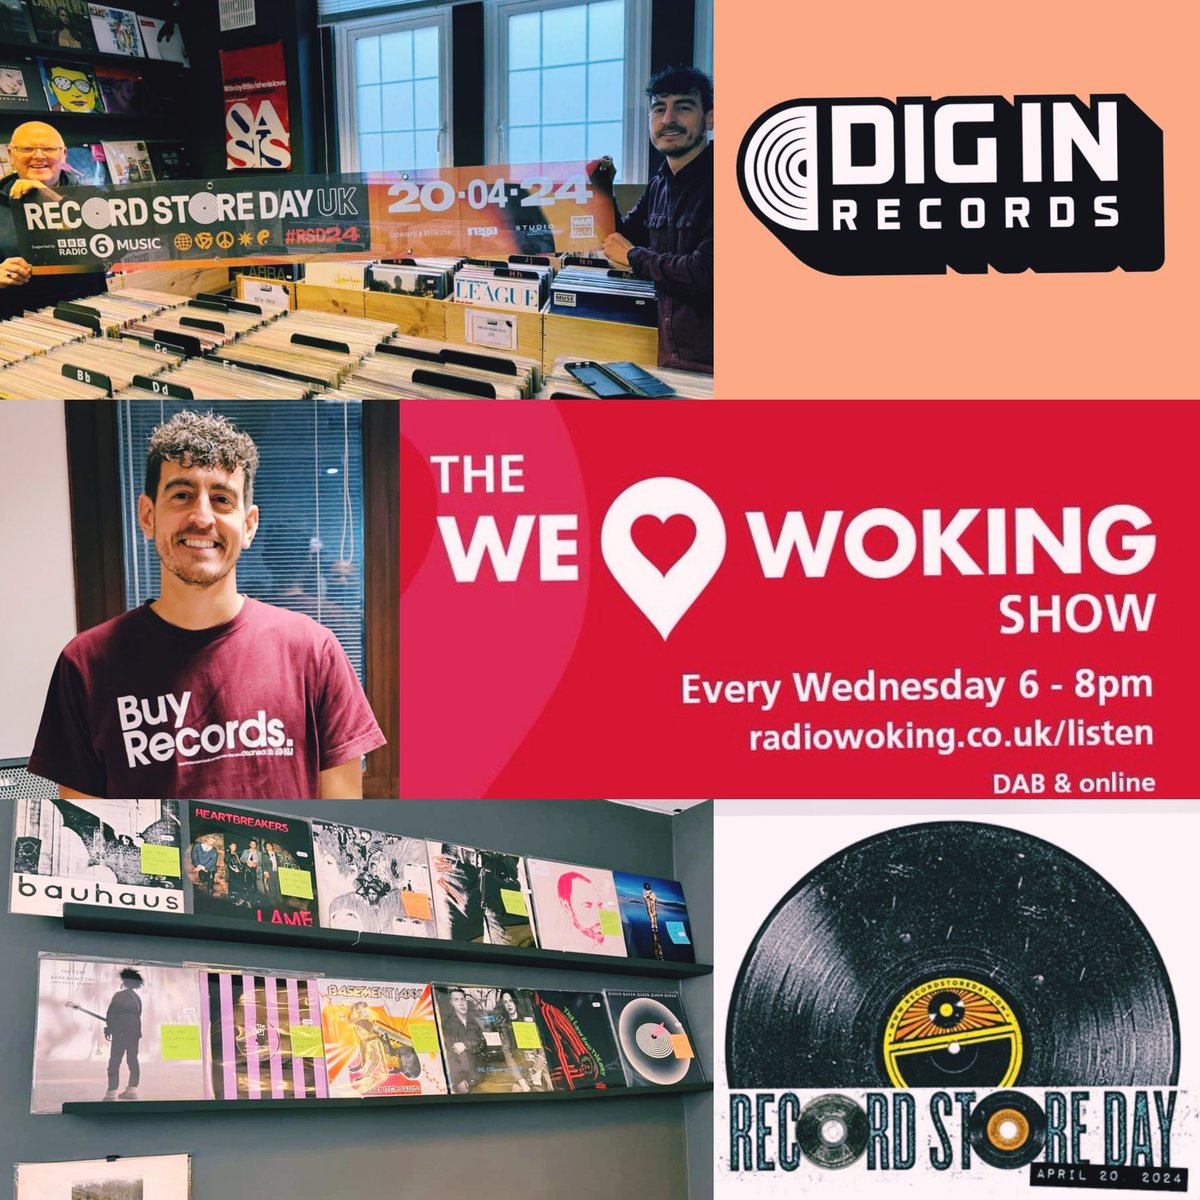 On Tonight's show - Justin Galbraith @DiginRecords talks about his business & #RecordStoreDay2024 
Plus #Woking events,fun,laughter & some great music!
Join us 6-8pm LIVE @RadioWoking 
Ask Alexa/Google to play Radio Woking.
#WeLoveWoking #RadioWoking #ProperLocalRadio #LocalRadio